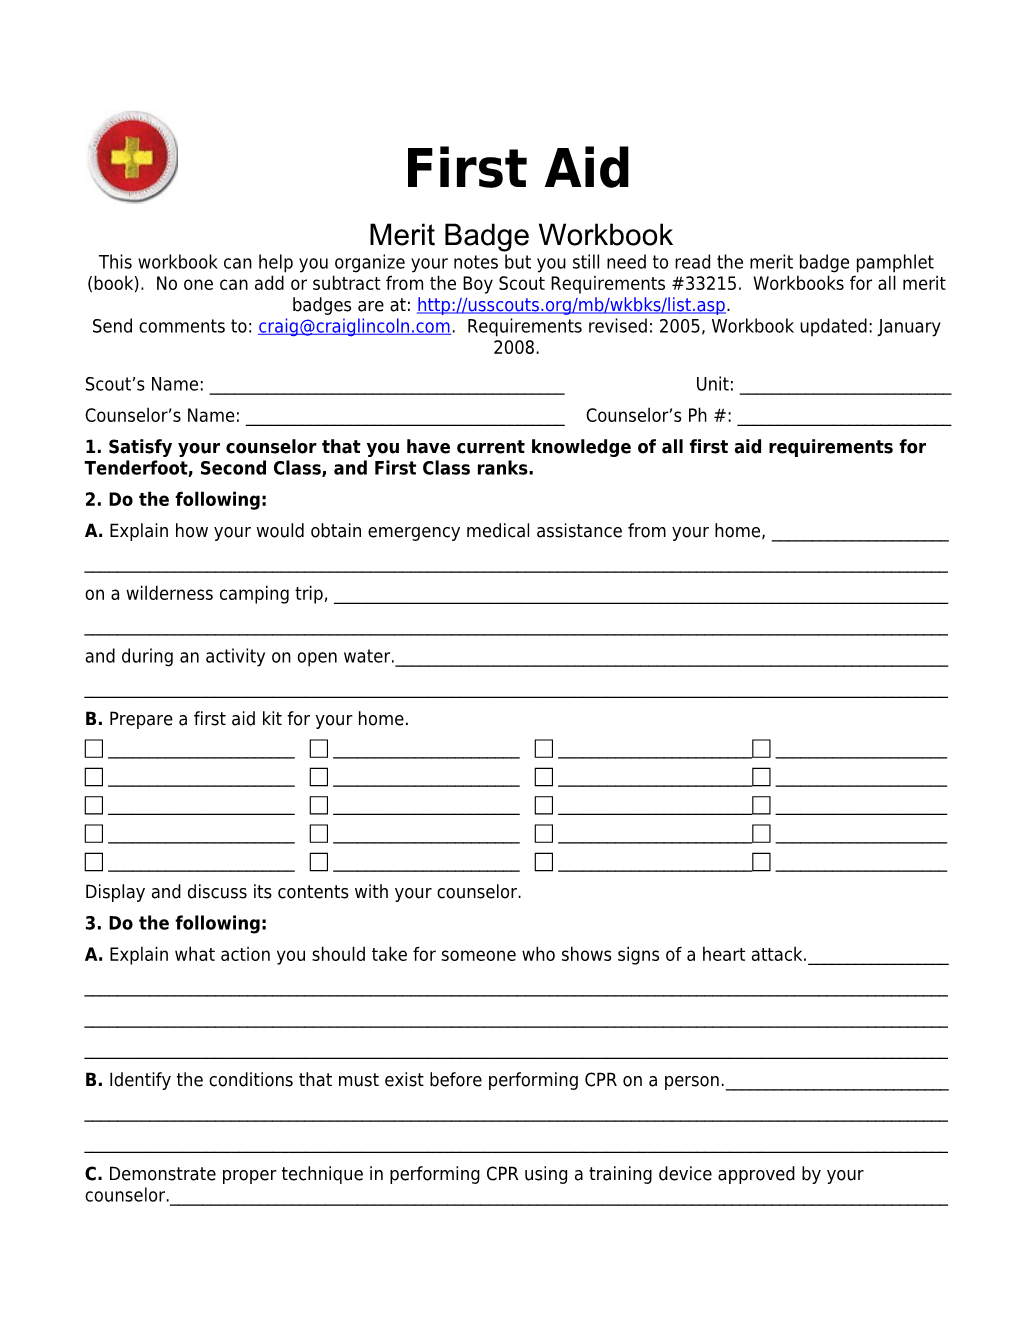 First Aid P. 1 Merit Badge Workbookscout's Name: ______